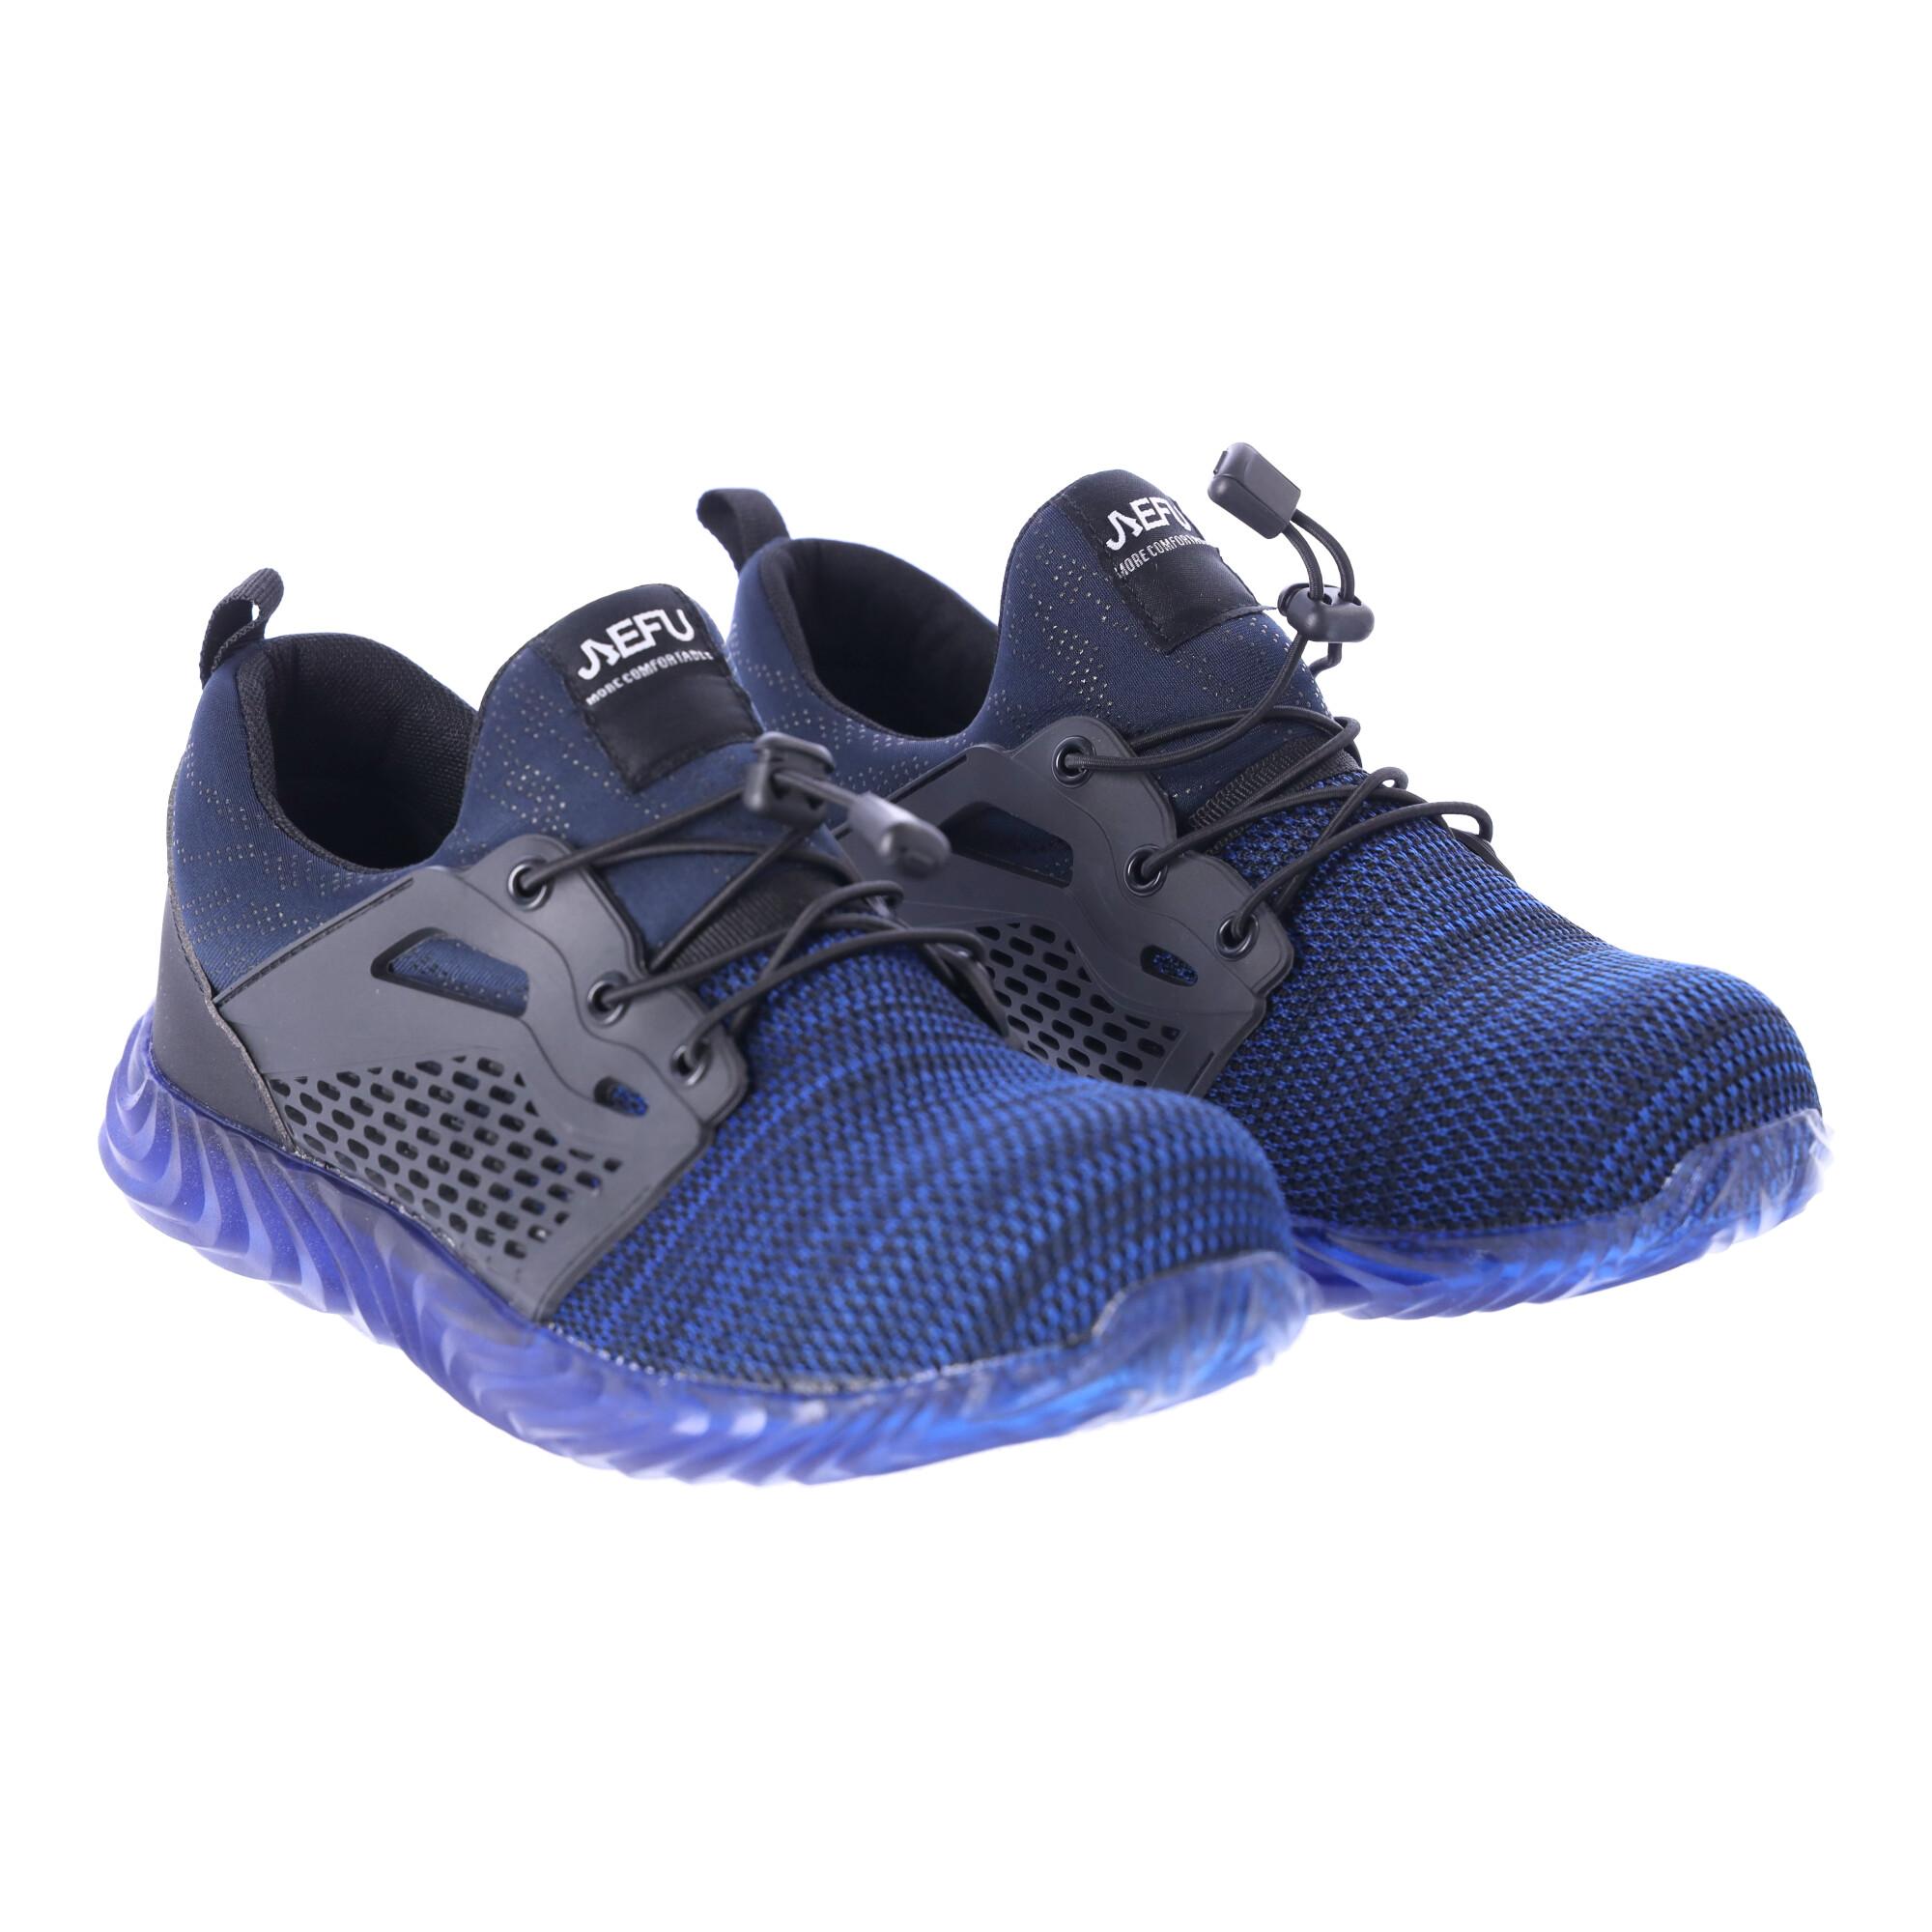 Work safety shoes "46" - navy blue